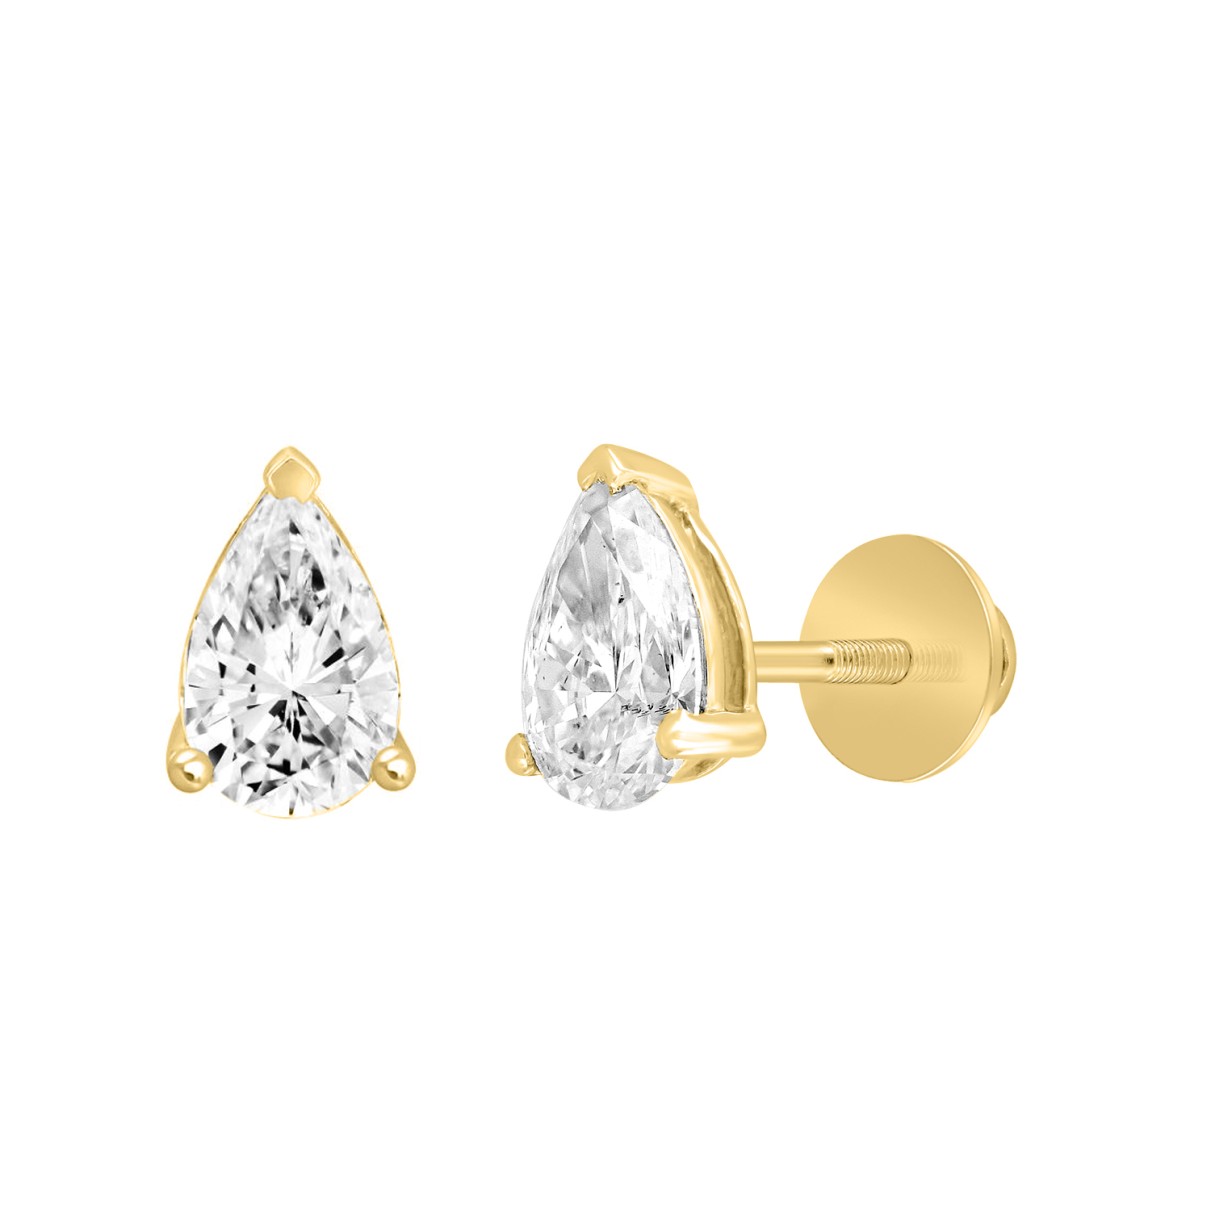 LADIES SOLITAIRE EARRINGS 1 1/2CT PEAR DIAMOND 14K YELLOW GOLD